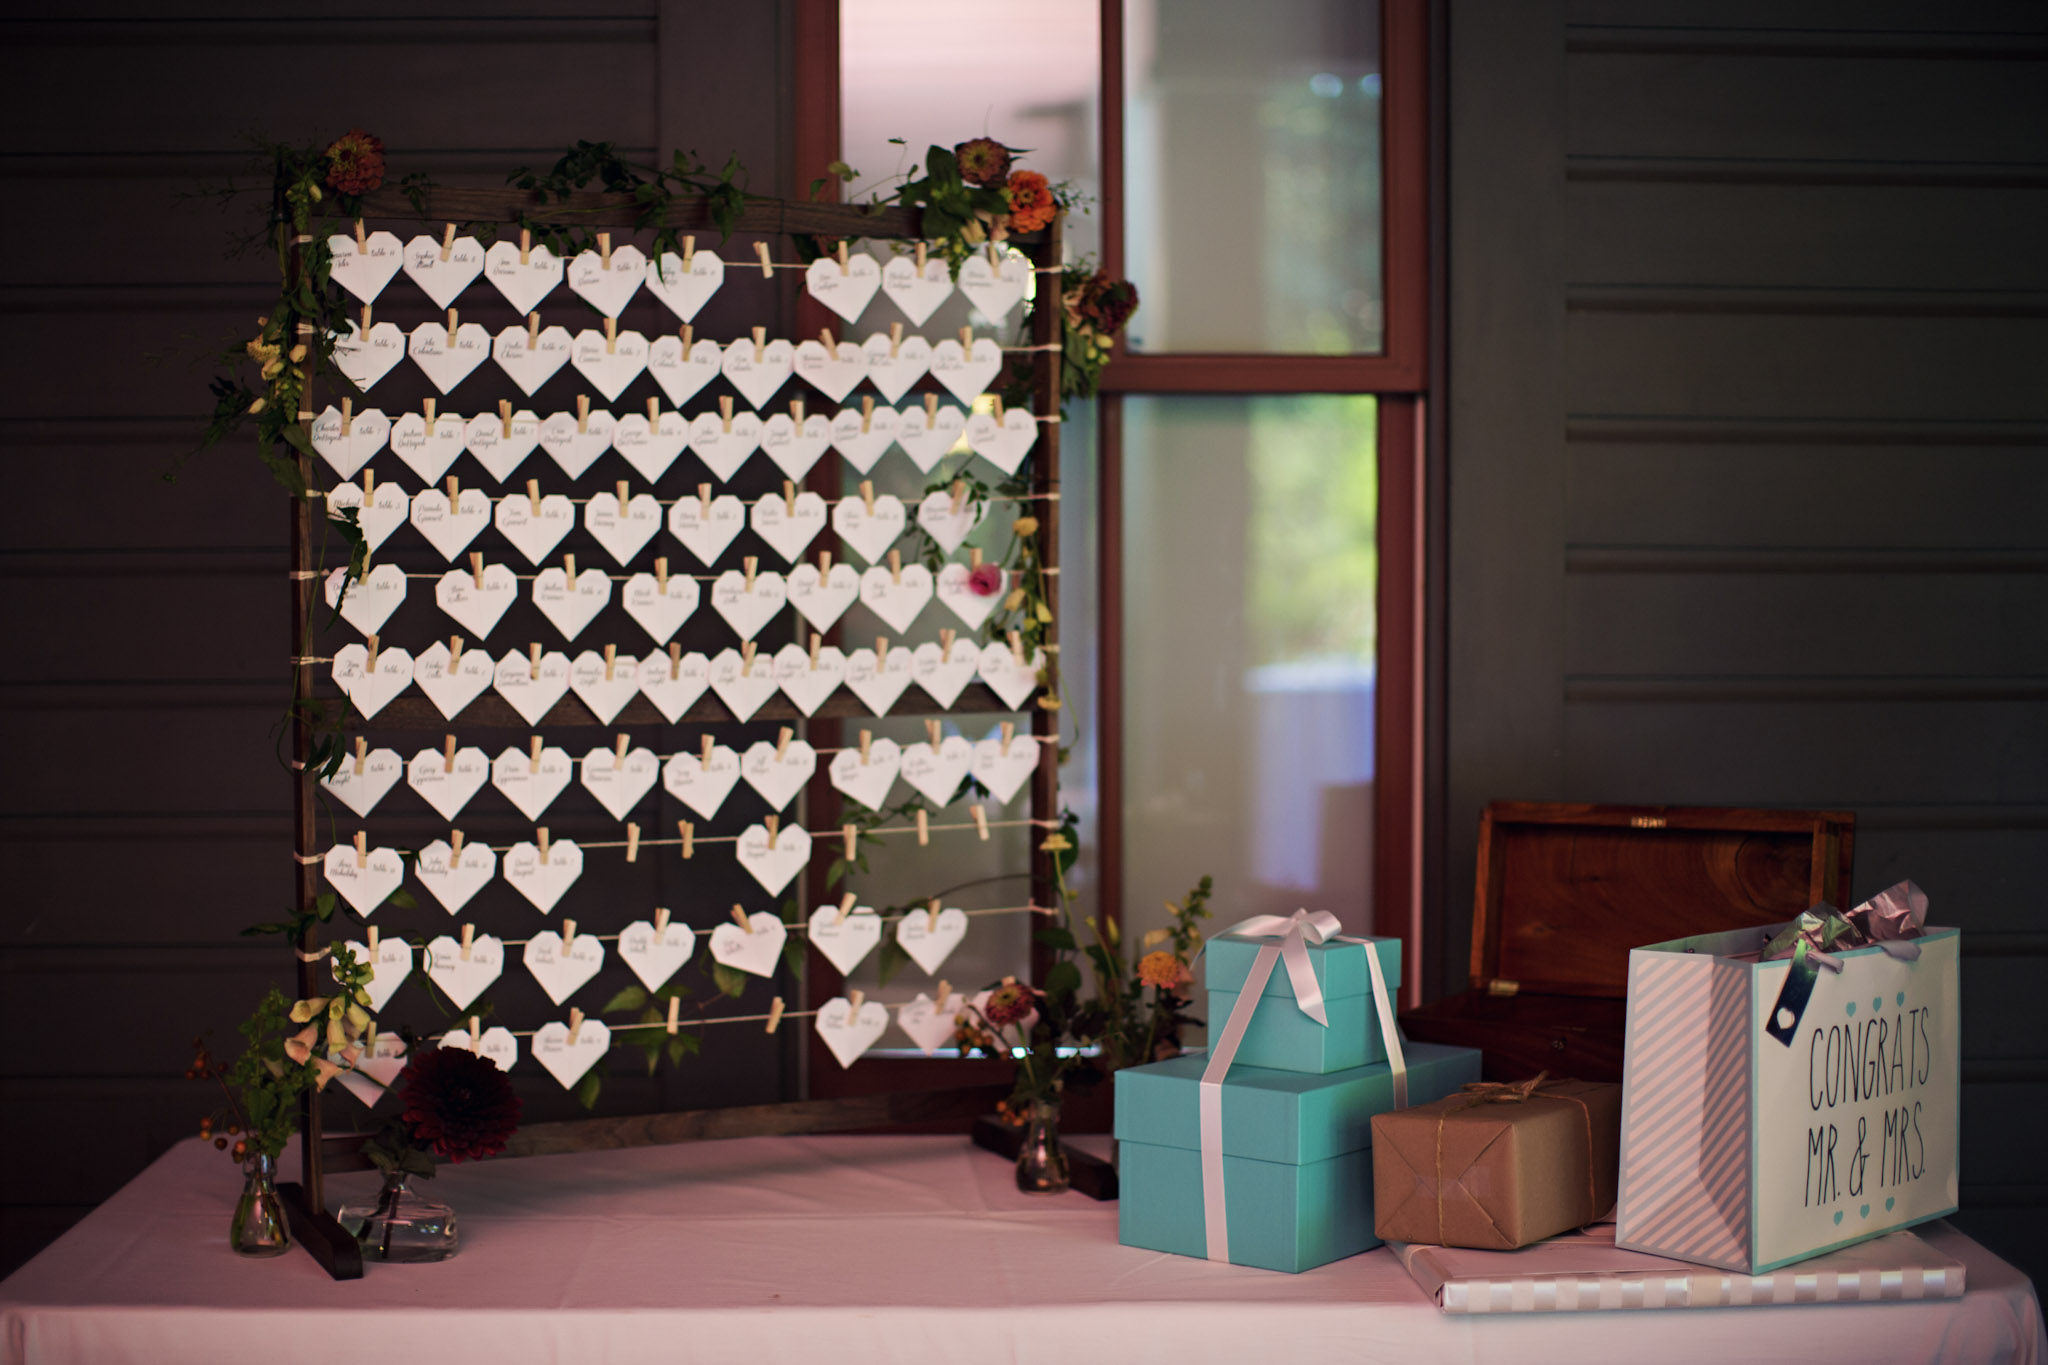 Photo by Elizabeth Fox of handmade wooden clothesline display for heart shaped seating cards